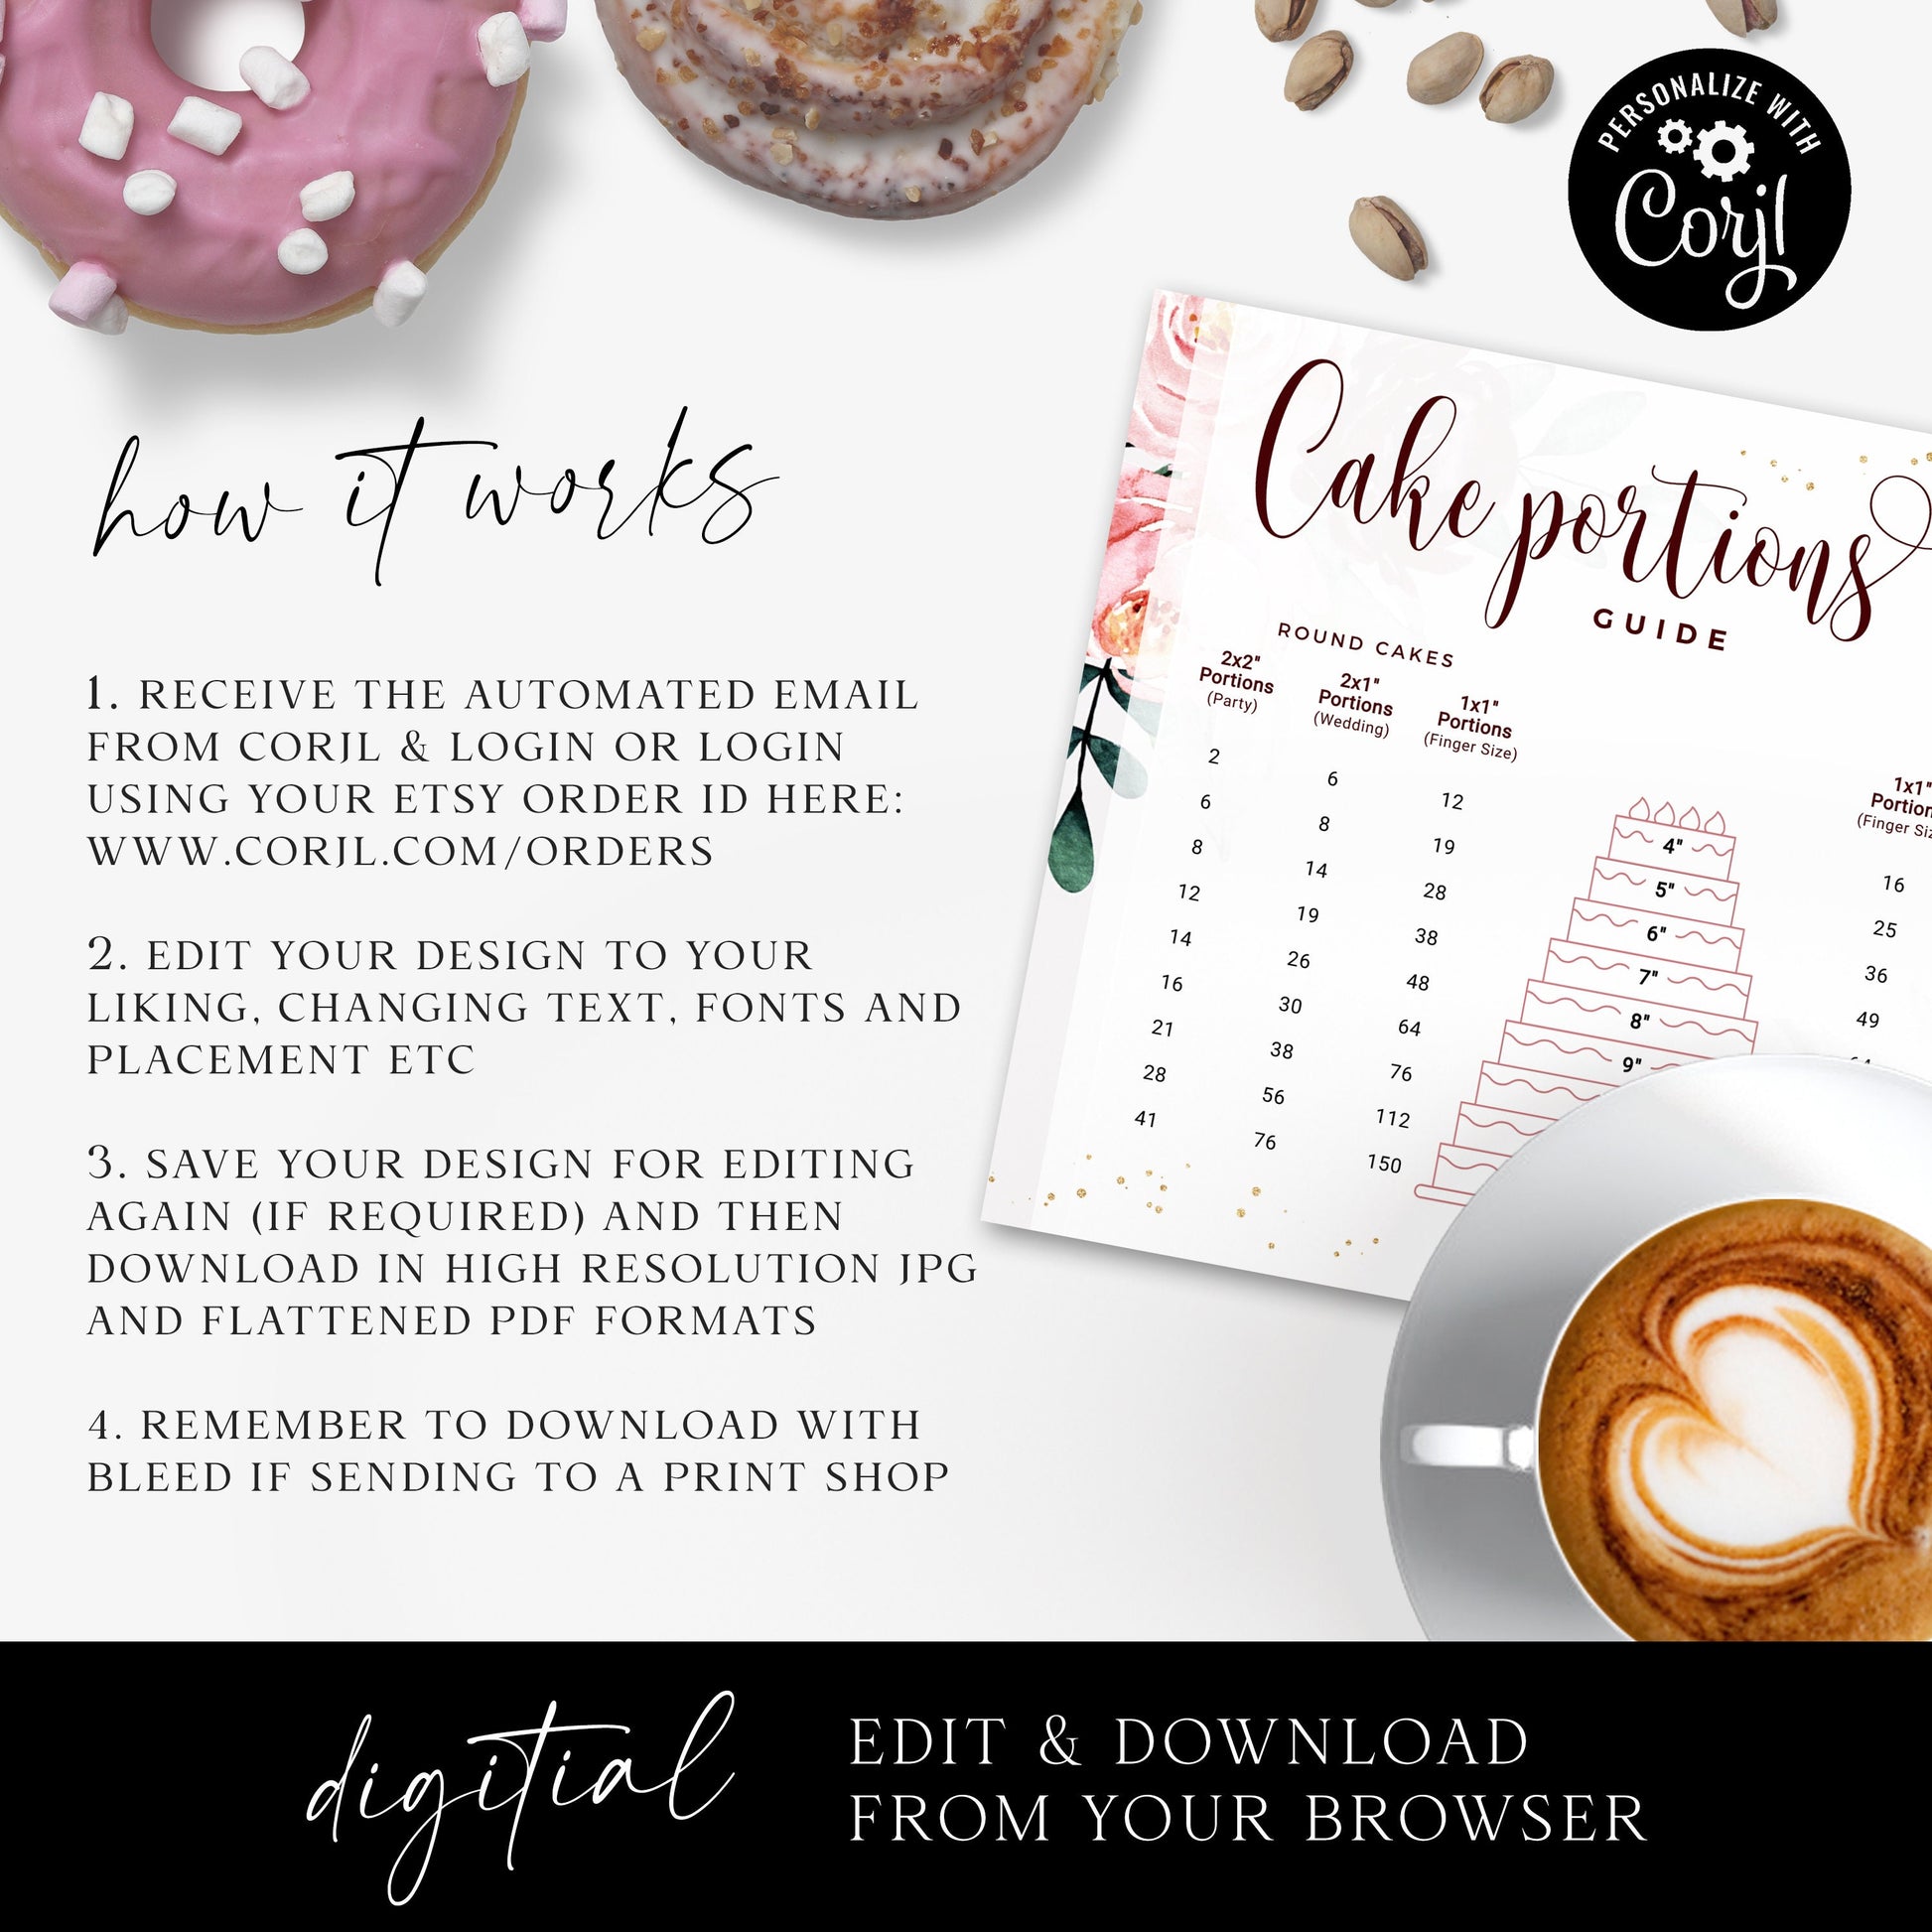 Editable Cake Portions Guide Template, Printable Tiered Cake Serving Size, Watercolor Red Round & Square Cakes Size Diagram CQ-001